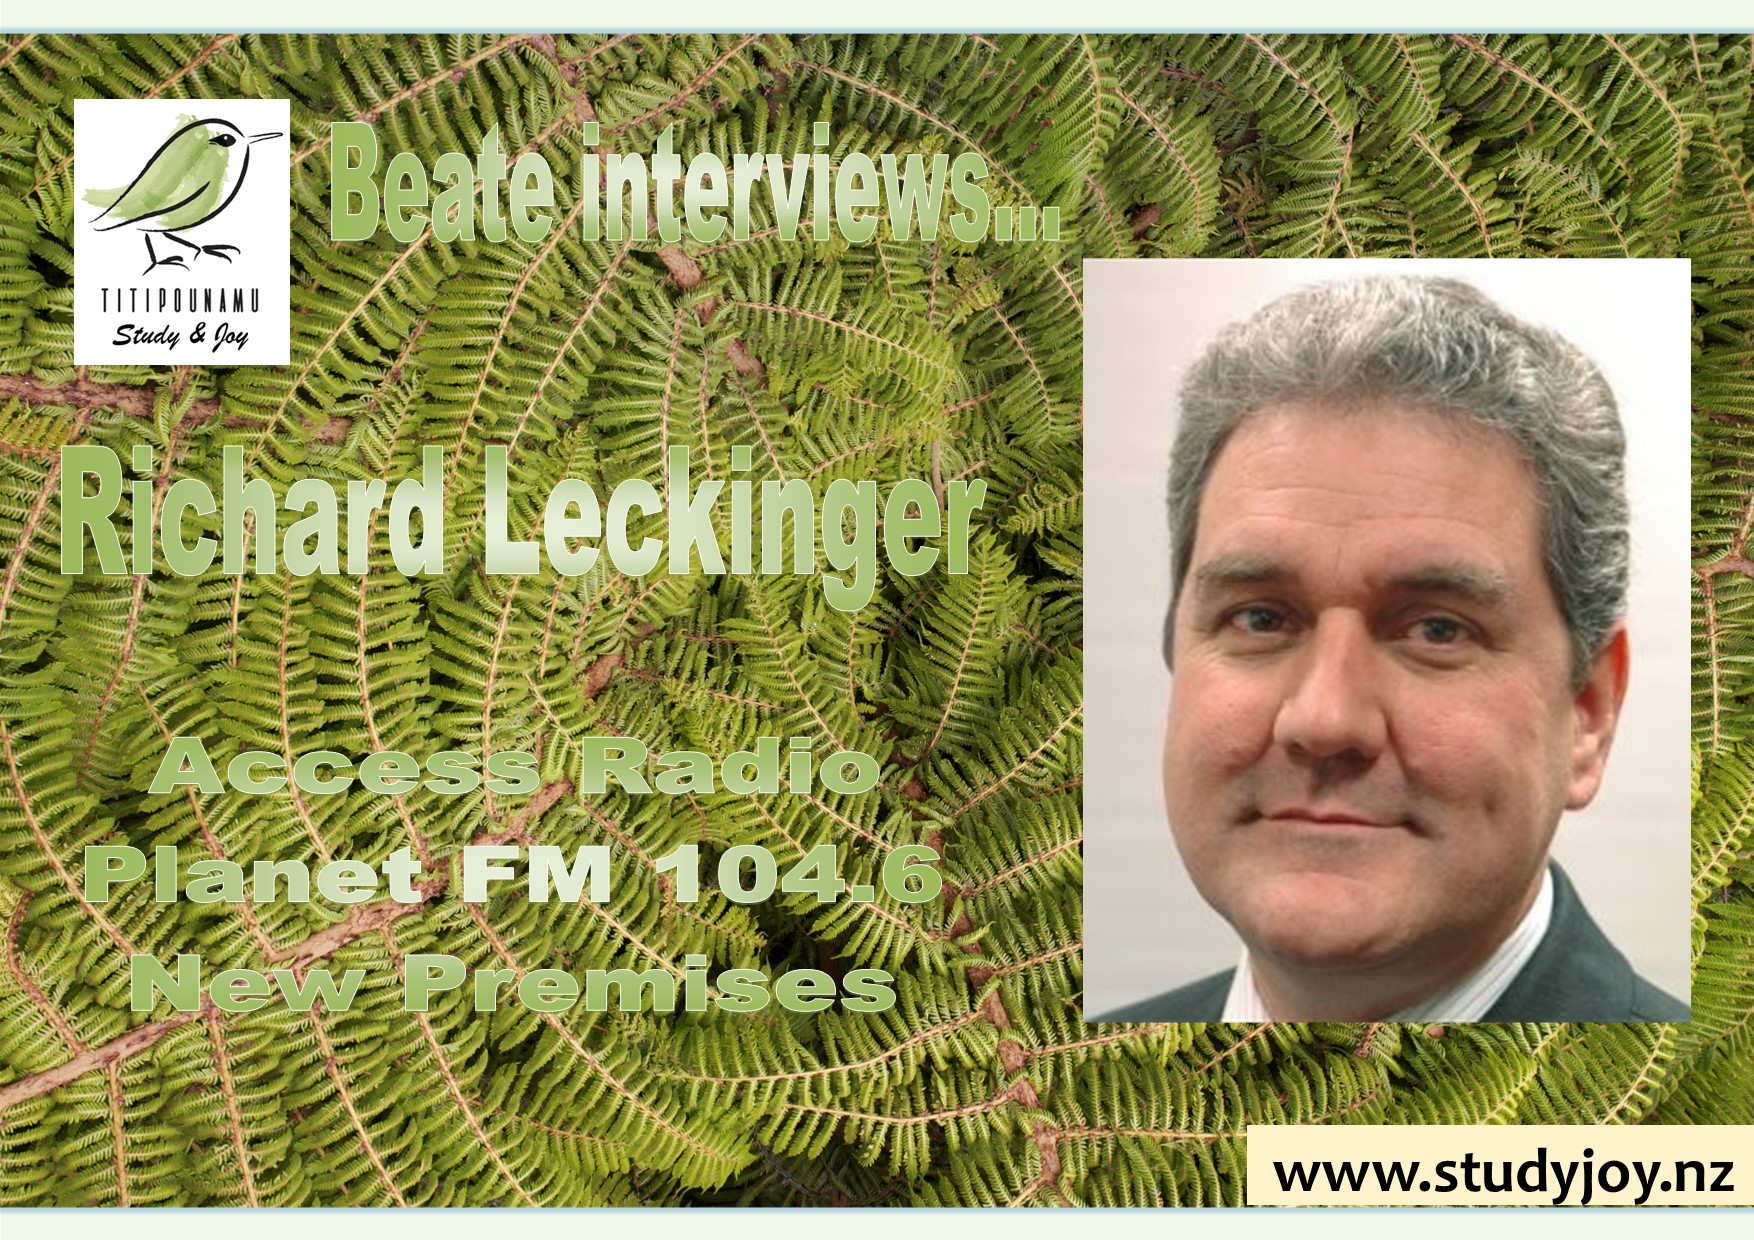 Read more about the article Richard Leckinger – Planet FM104.6